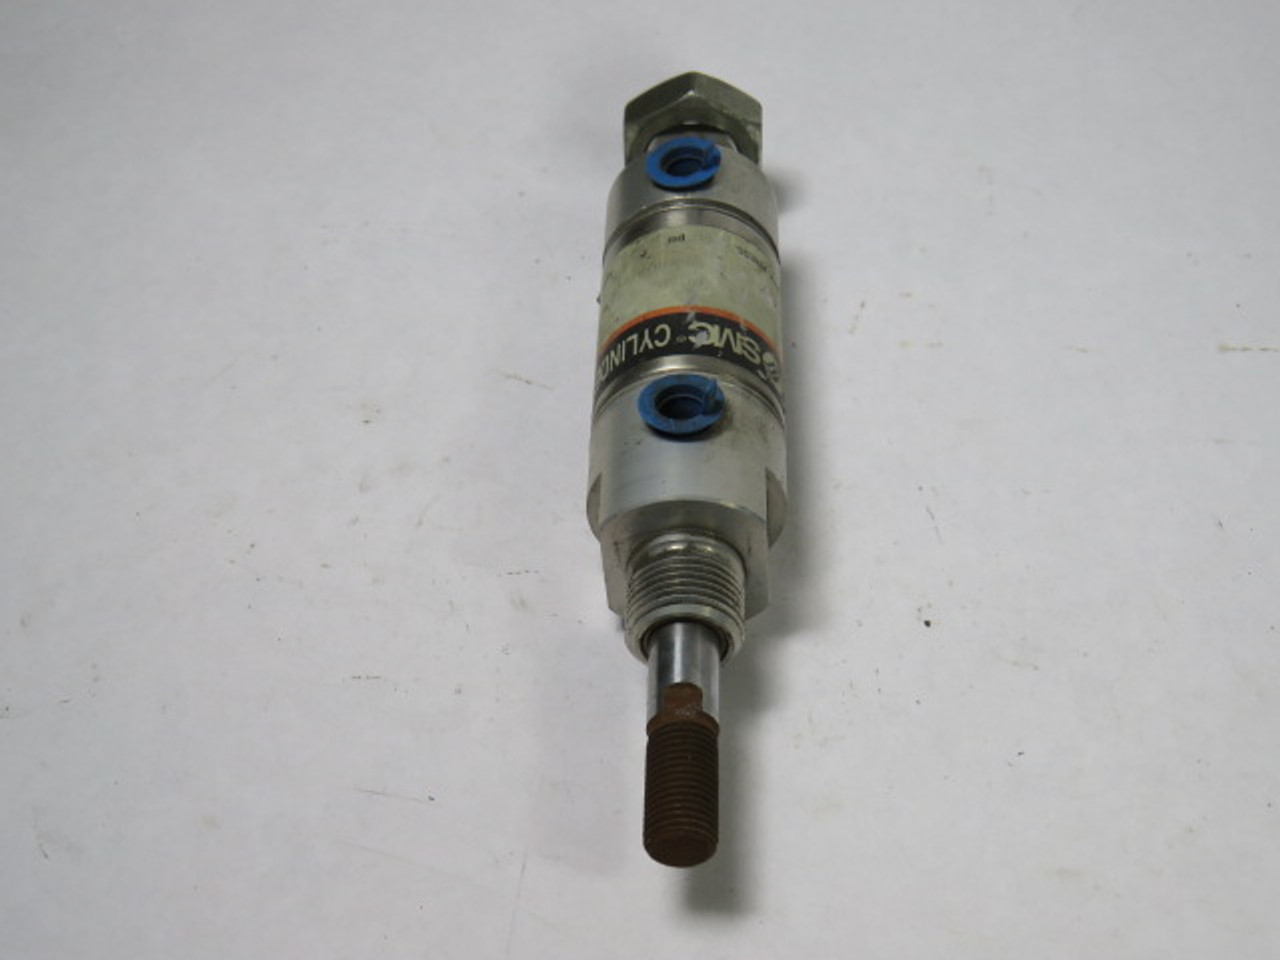 SMC NCMC125-0050 Pneumatic Air Cylinder 1-1/4" Bore 1/2" Stroke 250psi USED